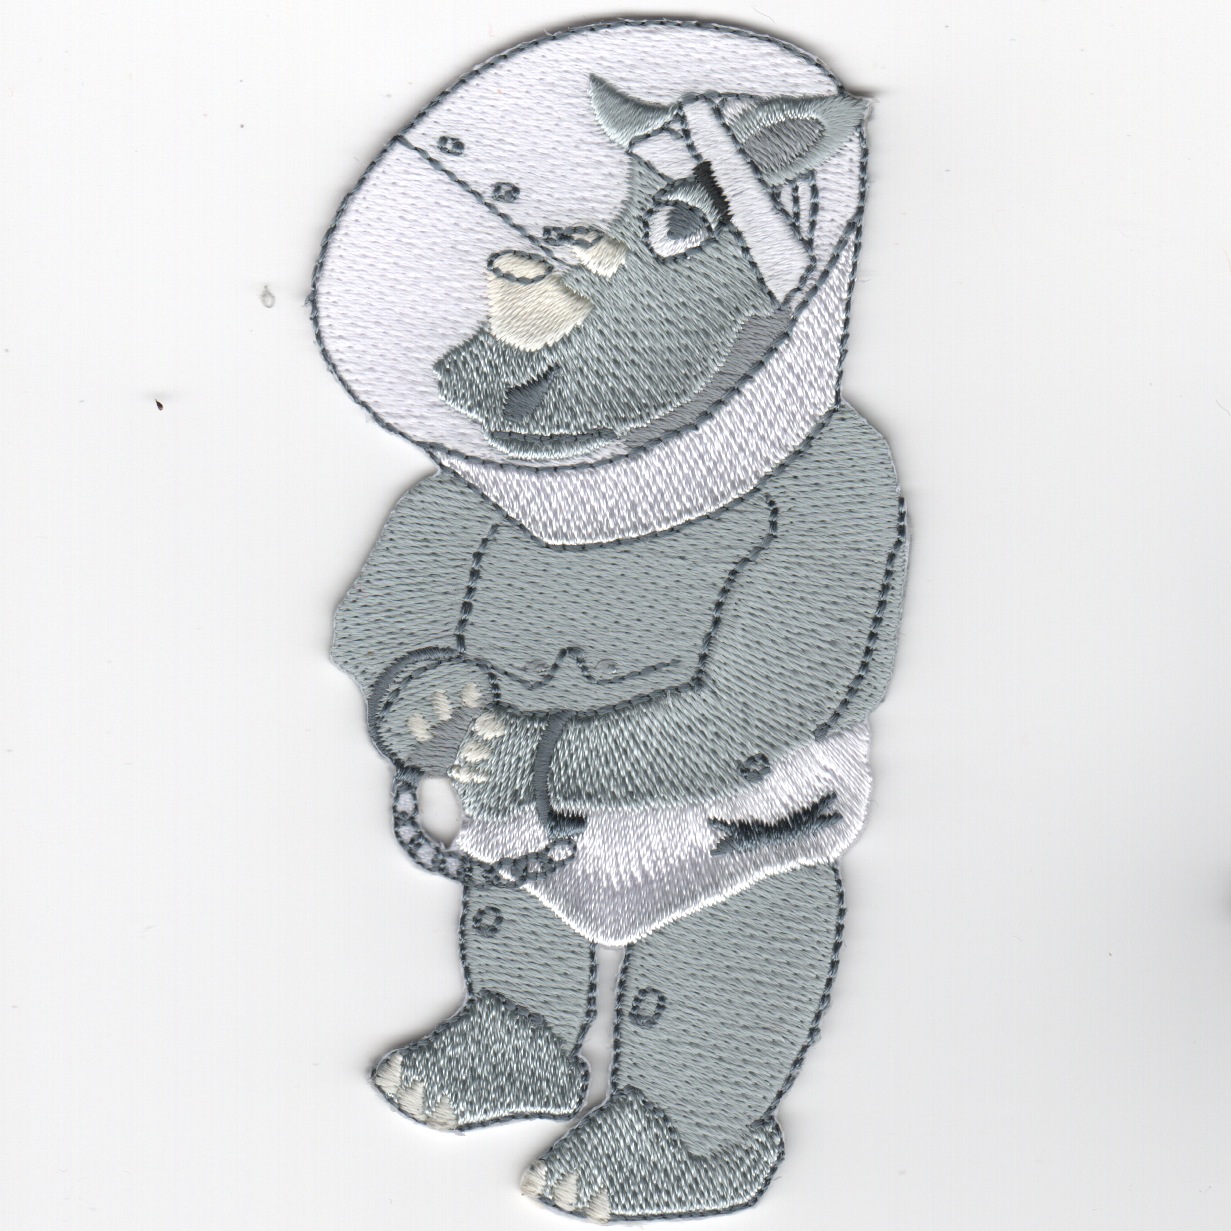 VFA-2 'Wounded Rhino' Patch